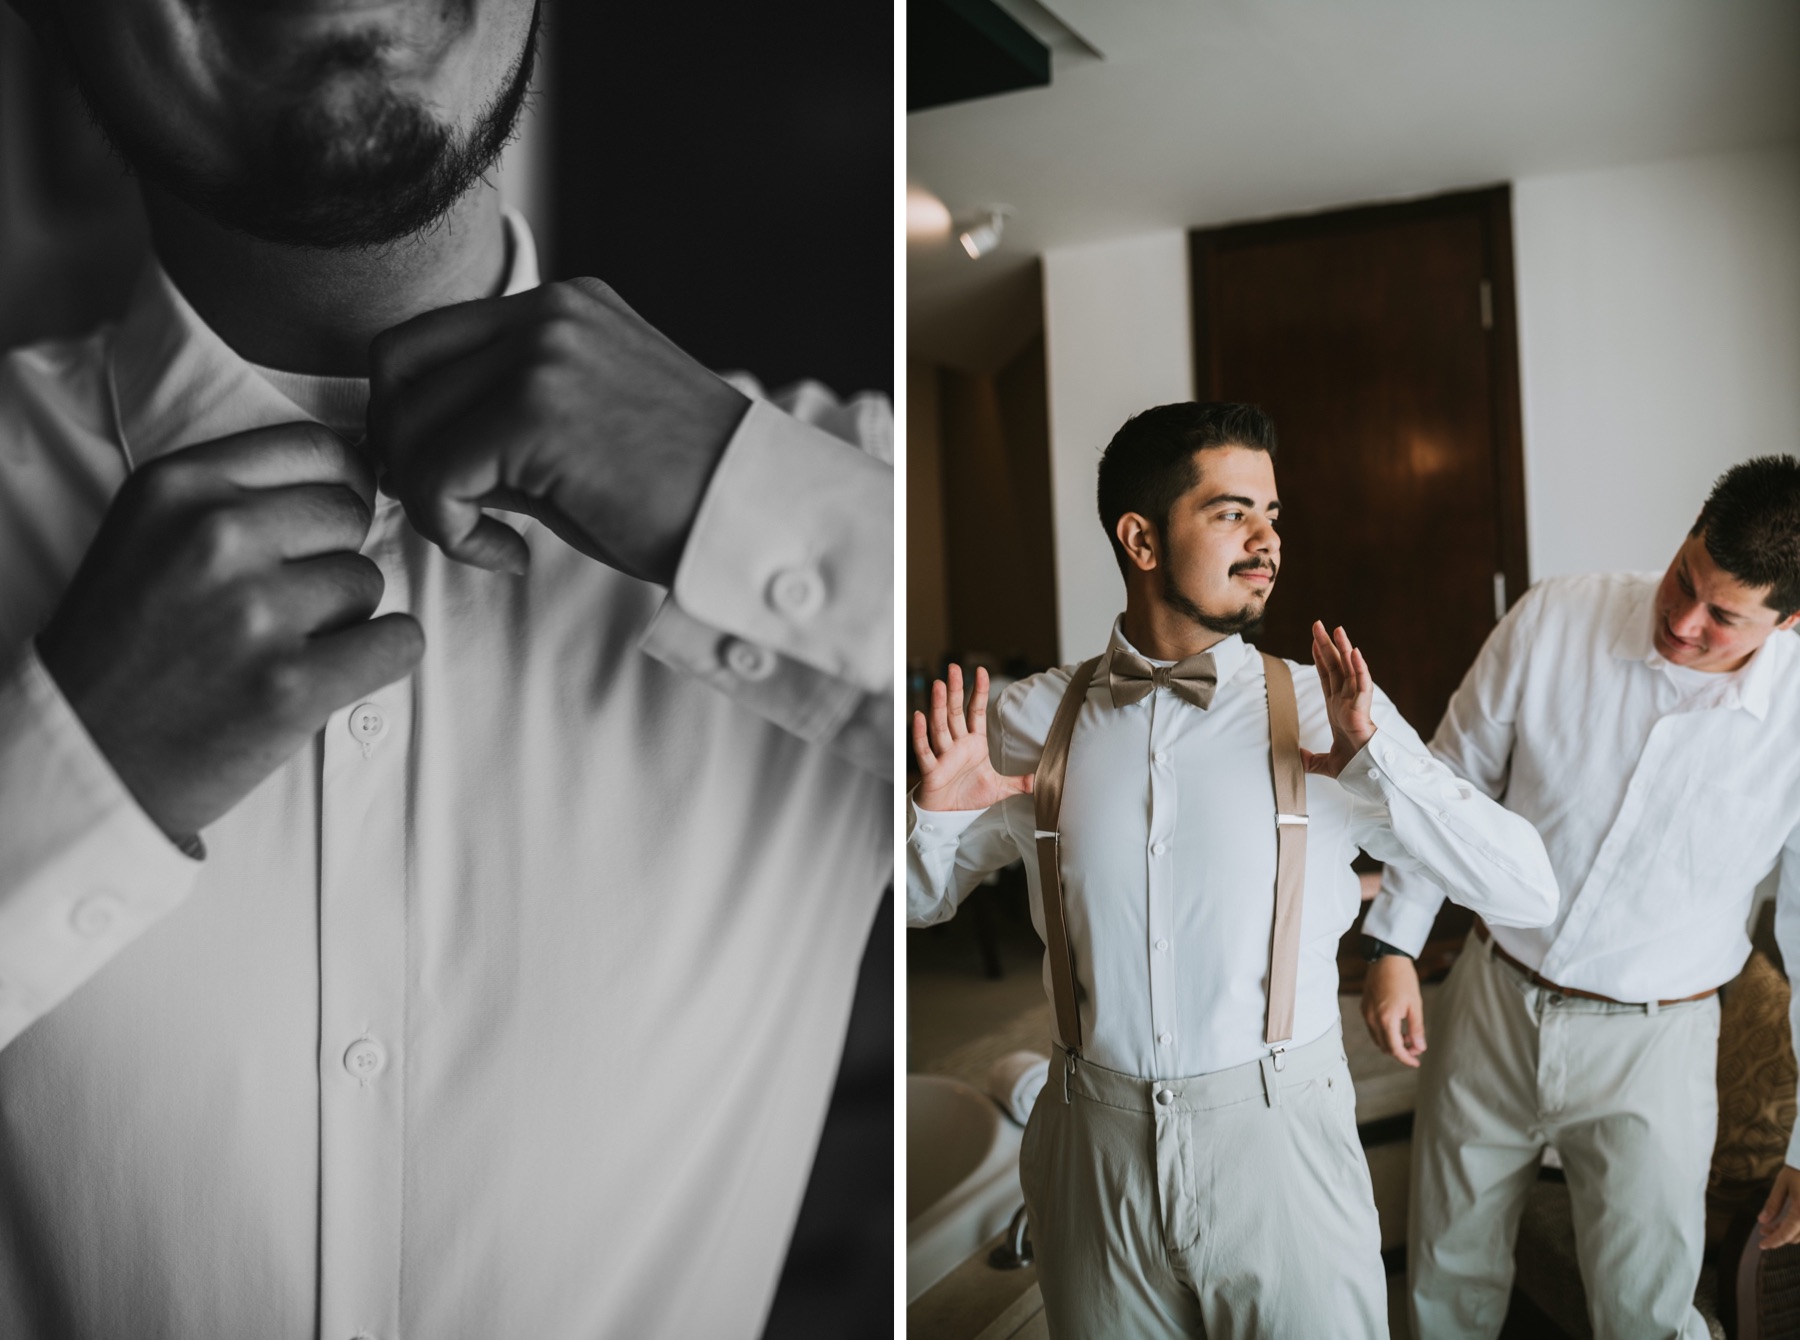 Side by side images of groom buttoning his shirt and getting his suspenders on.